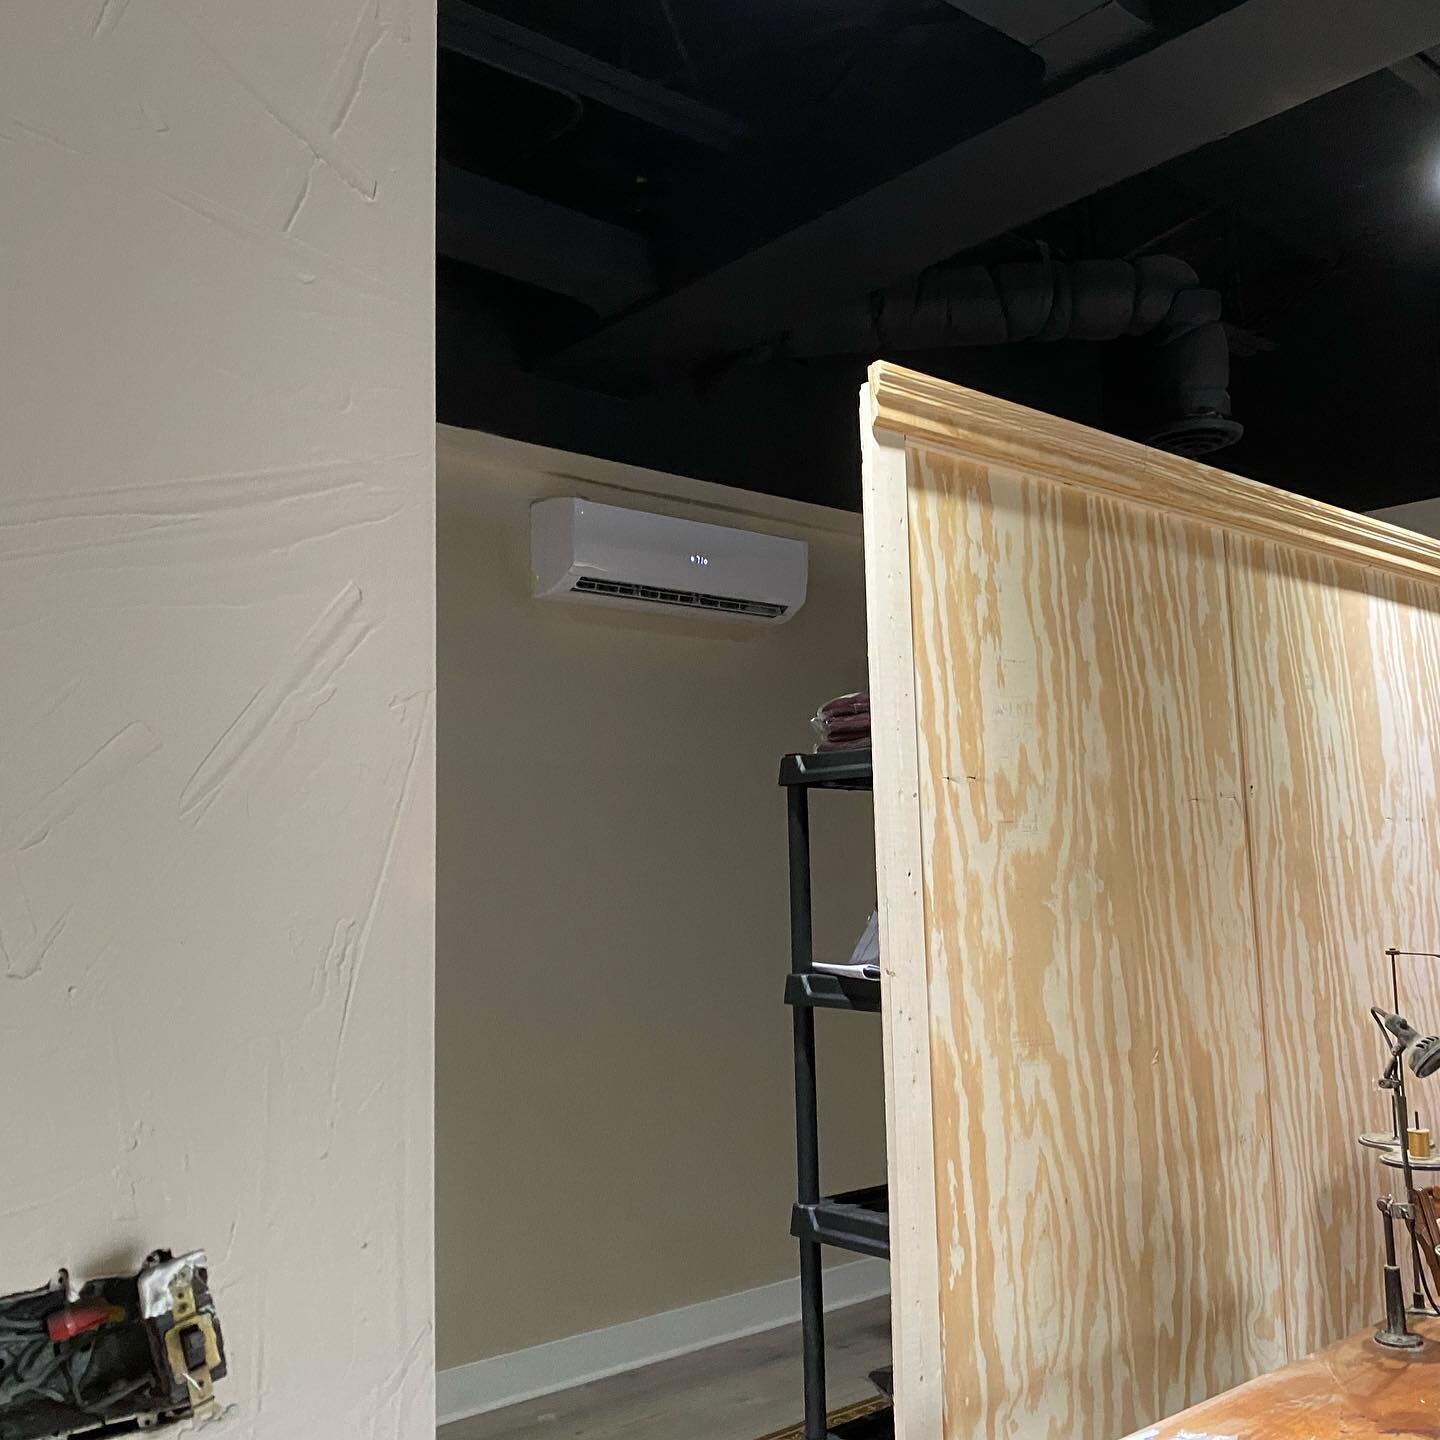 As the Seasons change do you have rooms that you want to cool ?Here we added a Mini-split unit to heat and cool a Activity room.  Give us a call for HVAC needs .